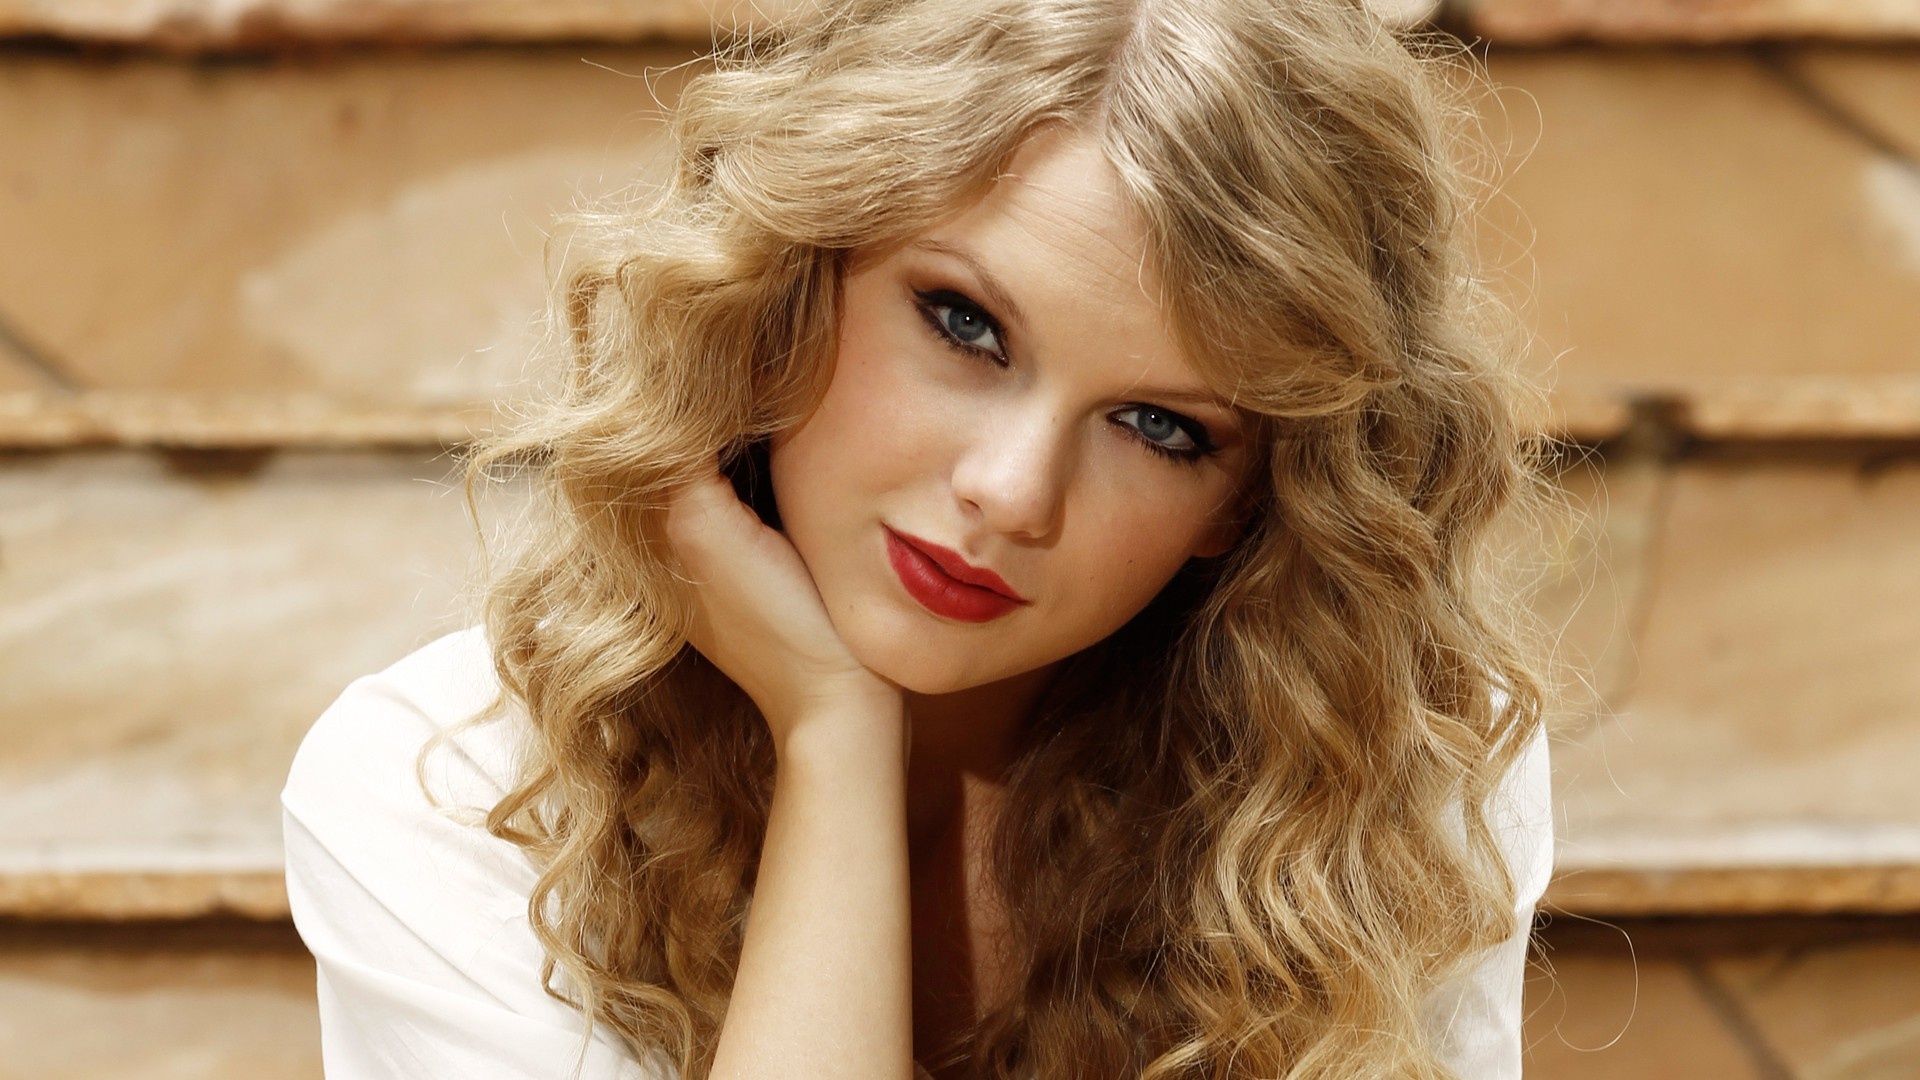 Hot New Music Video Taylor Swift Never Go Out Of Style Lyrics